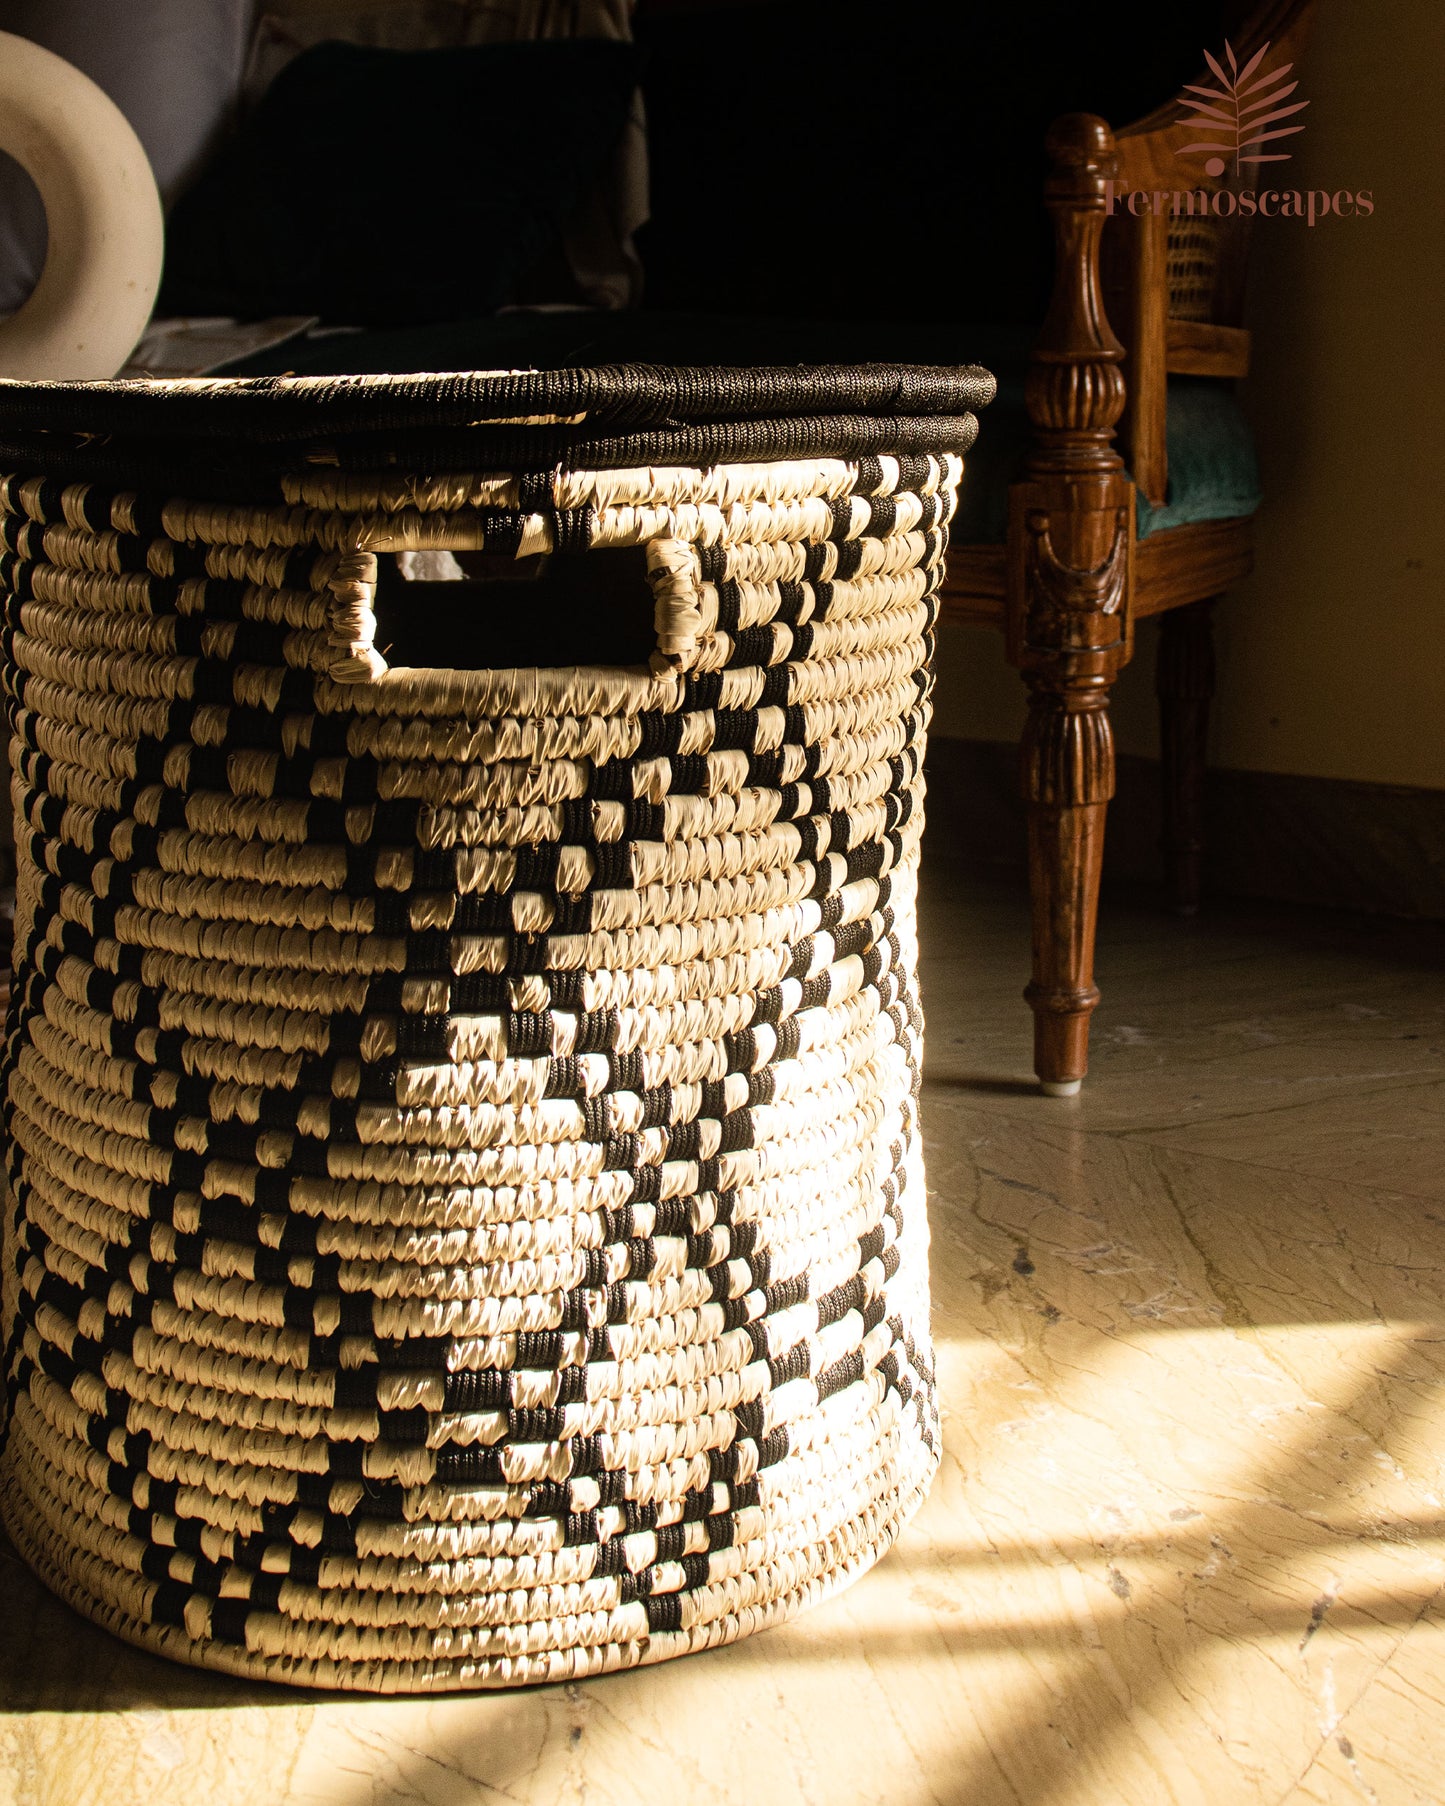 Mira Hand-woven Laundry Bag with Lid